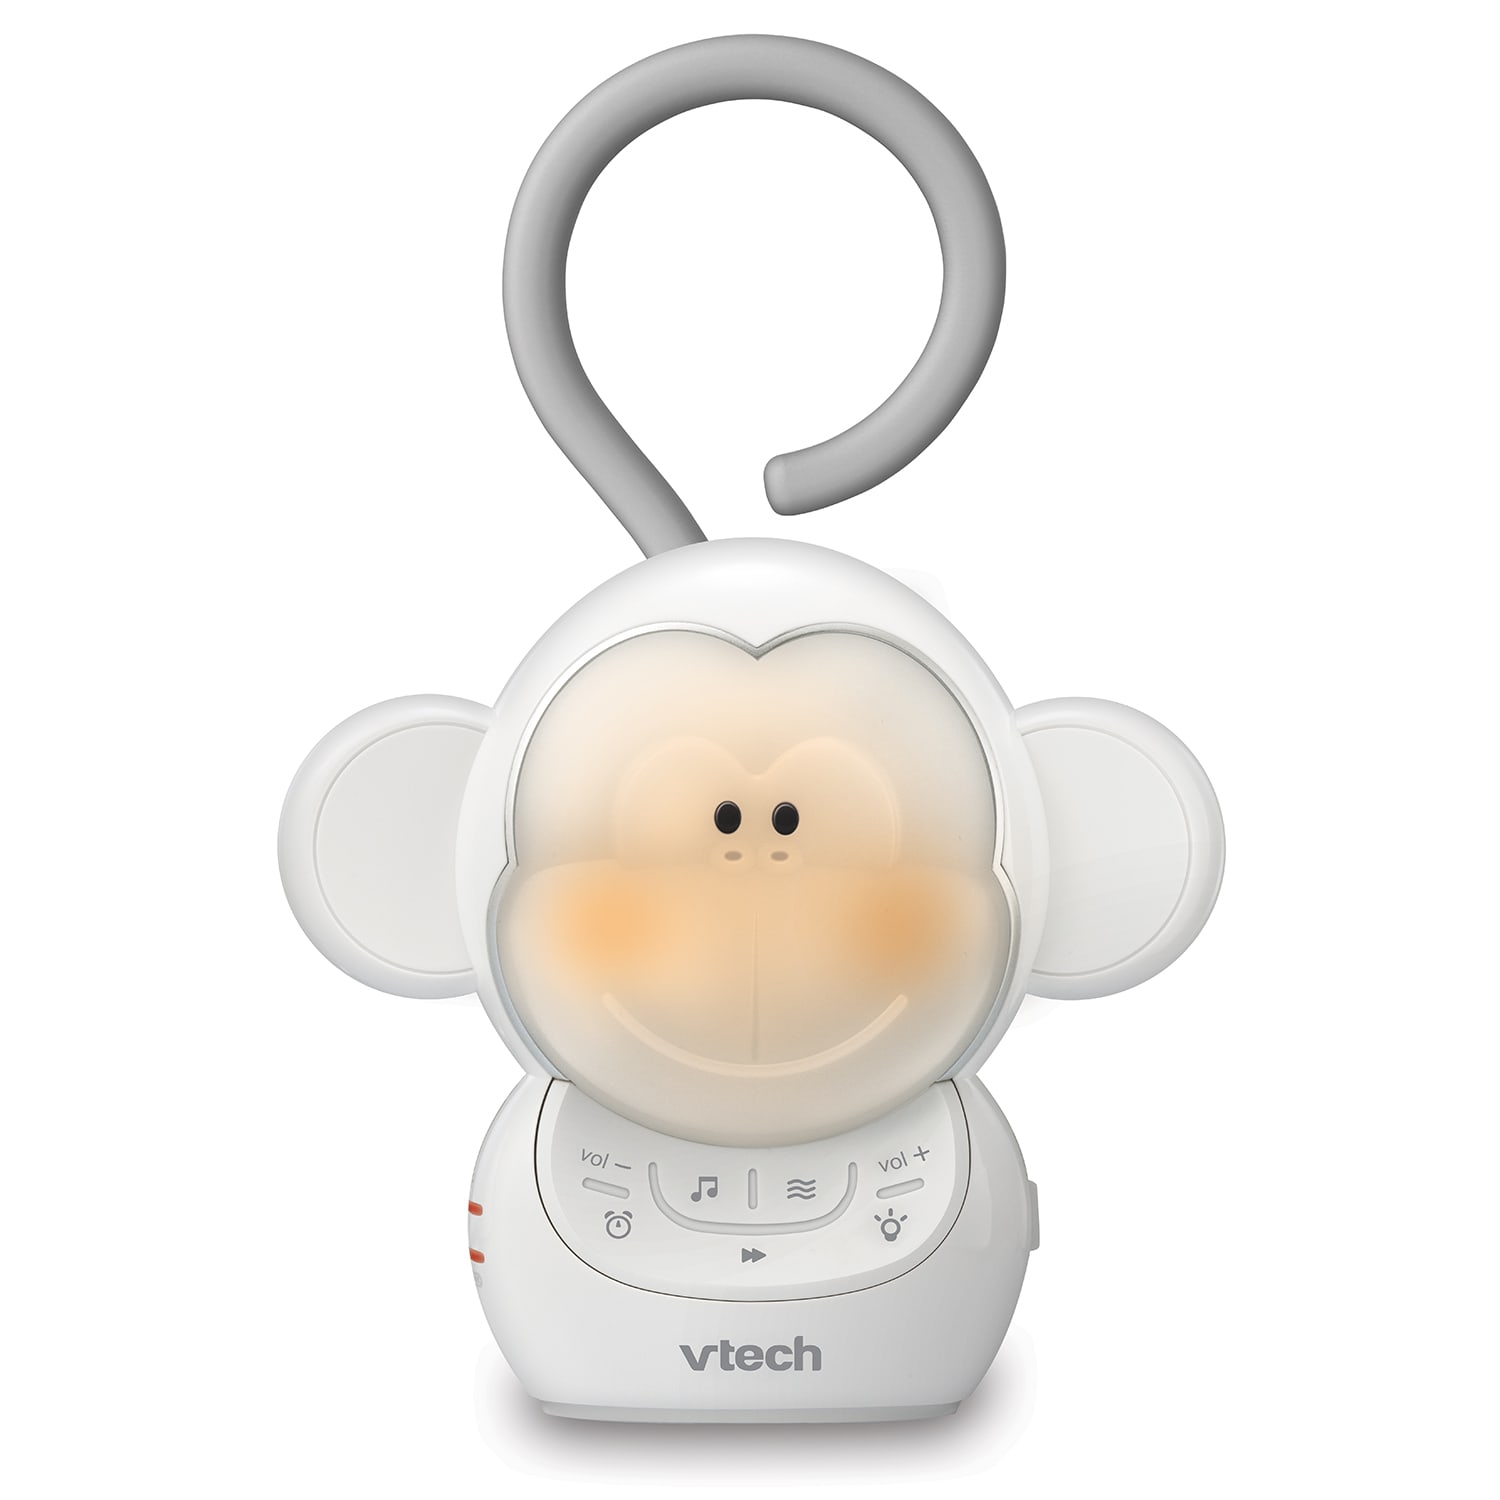 Myla the Monkey® Portable Soother